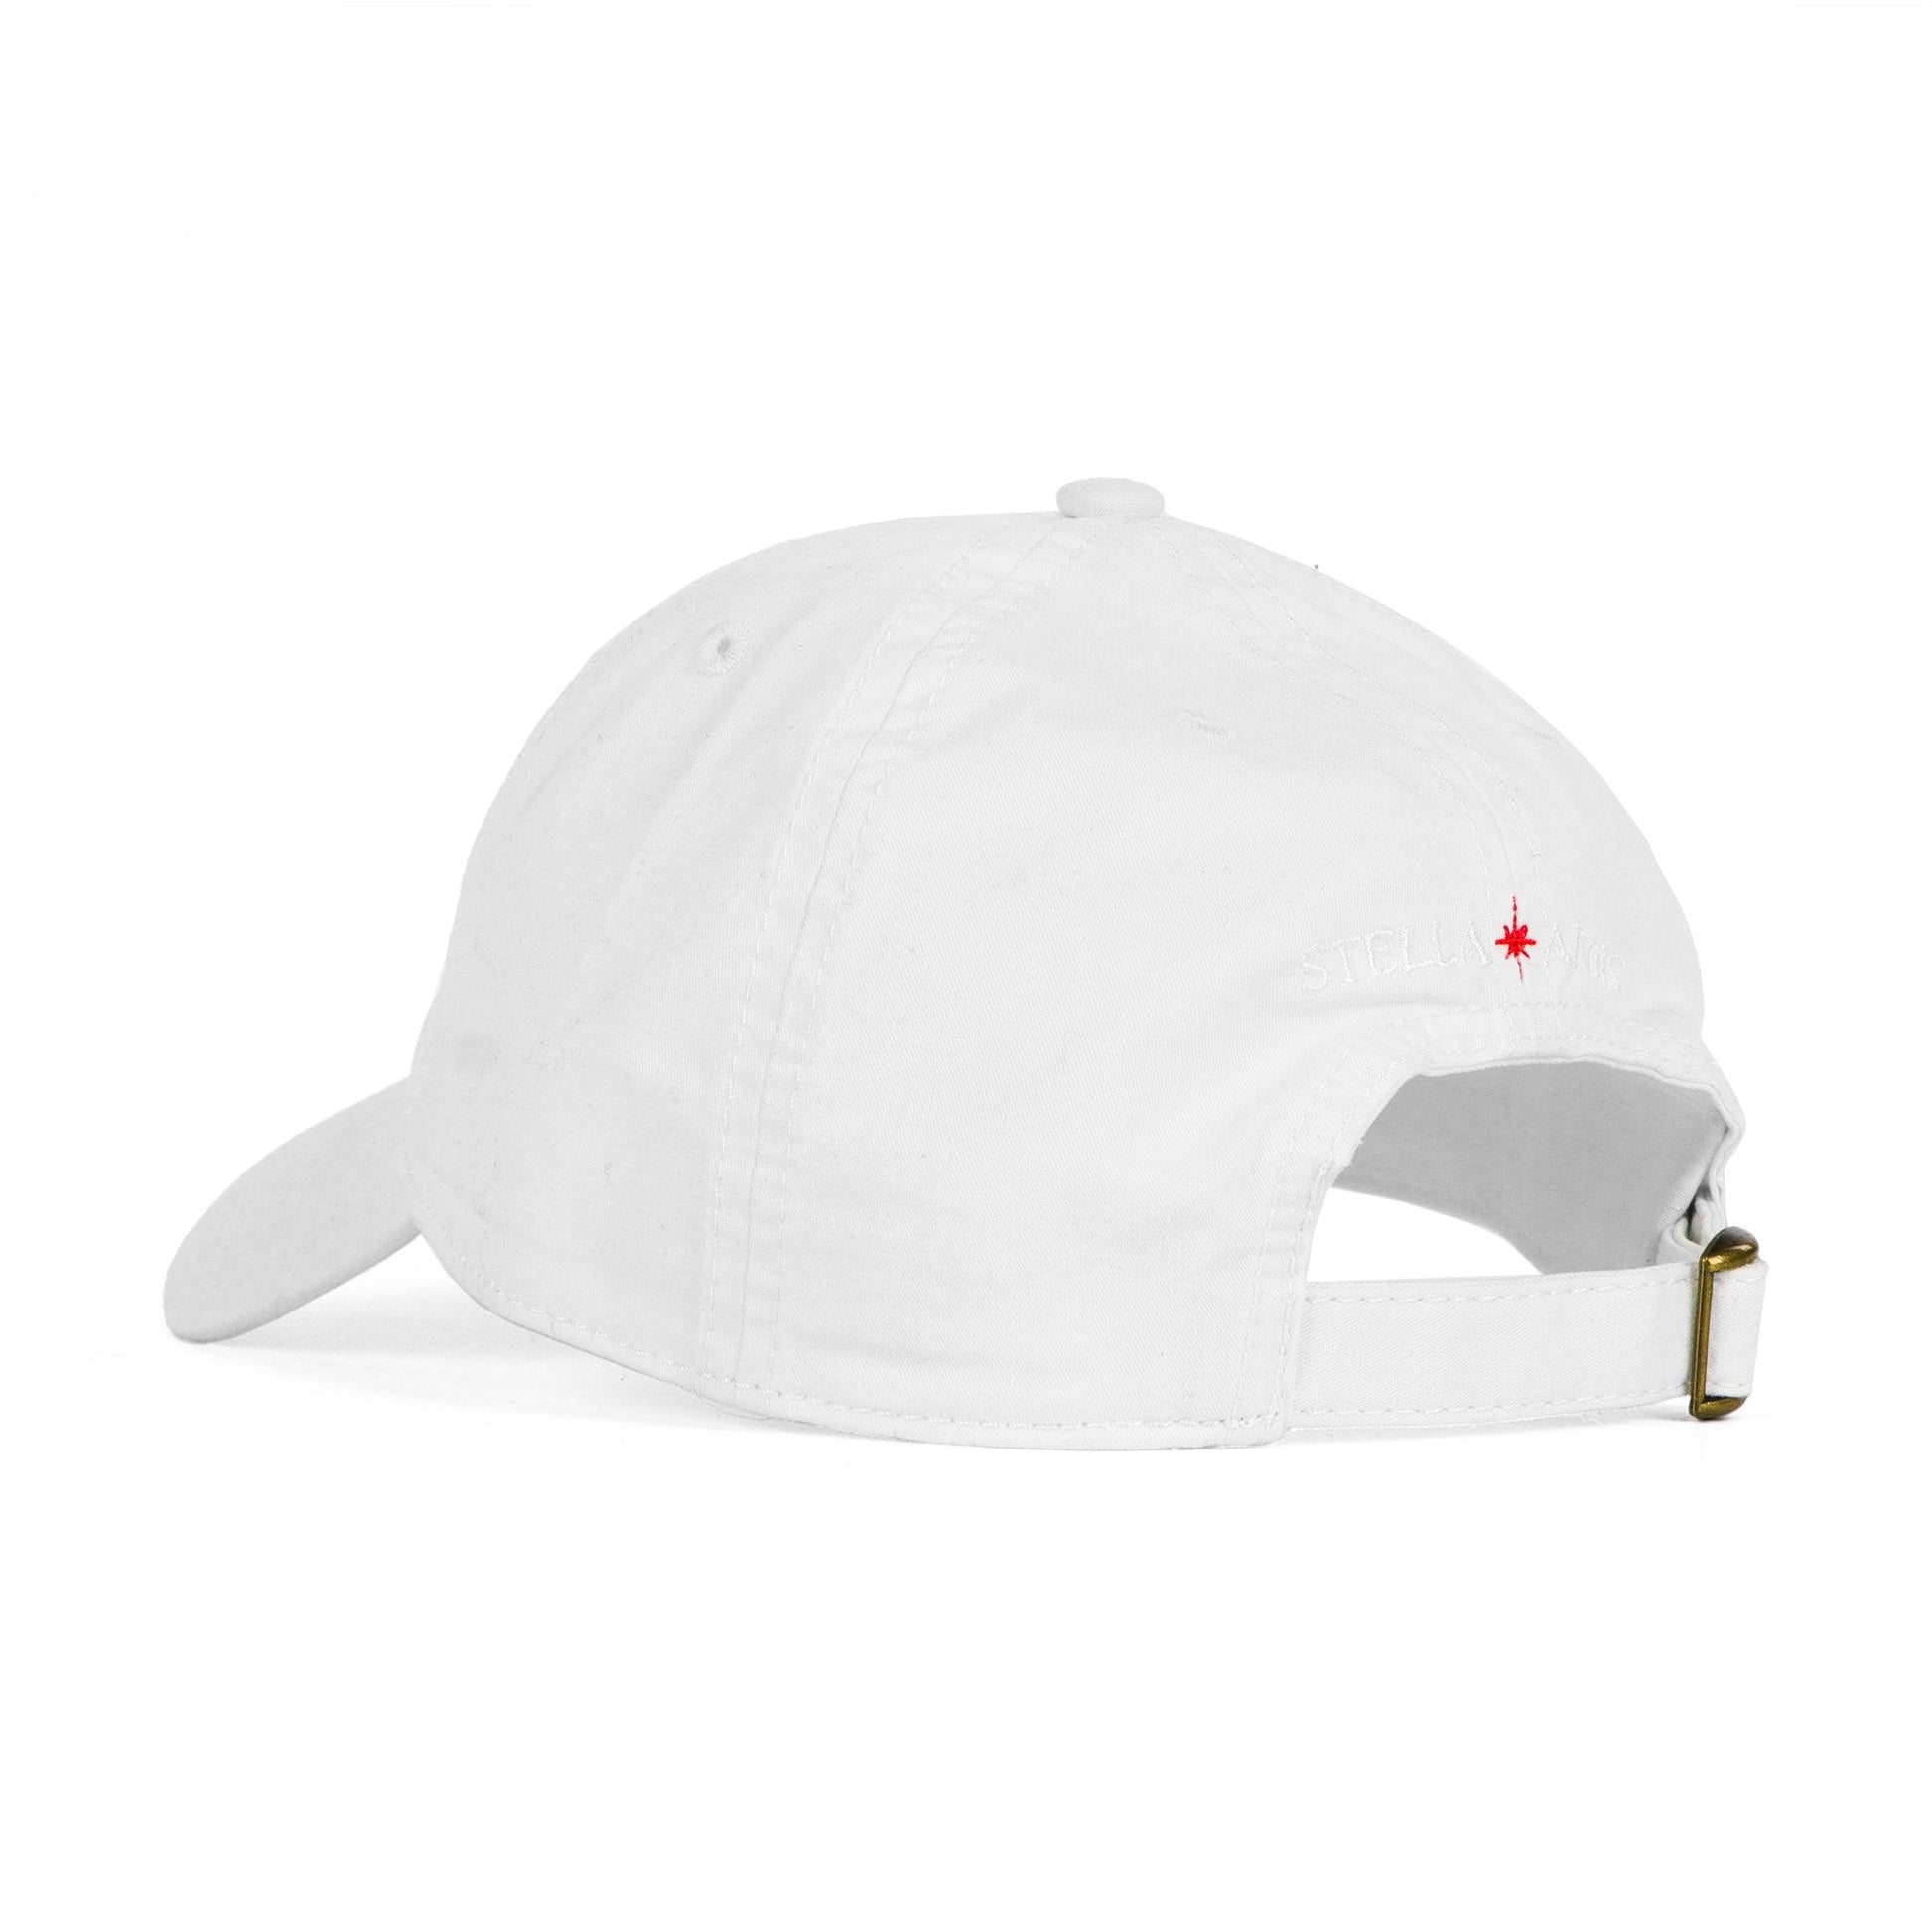 Back of hat with Stella artois in white embroidery with the star in red with a metal clasp and adjustable strap